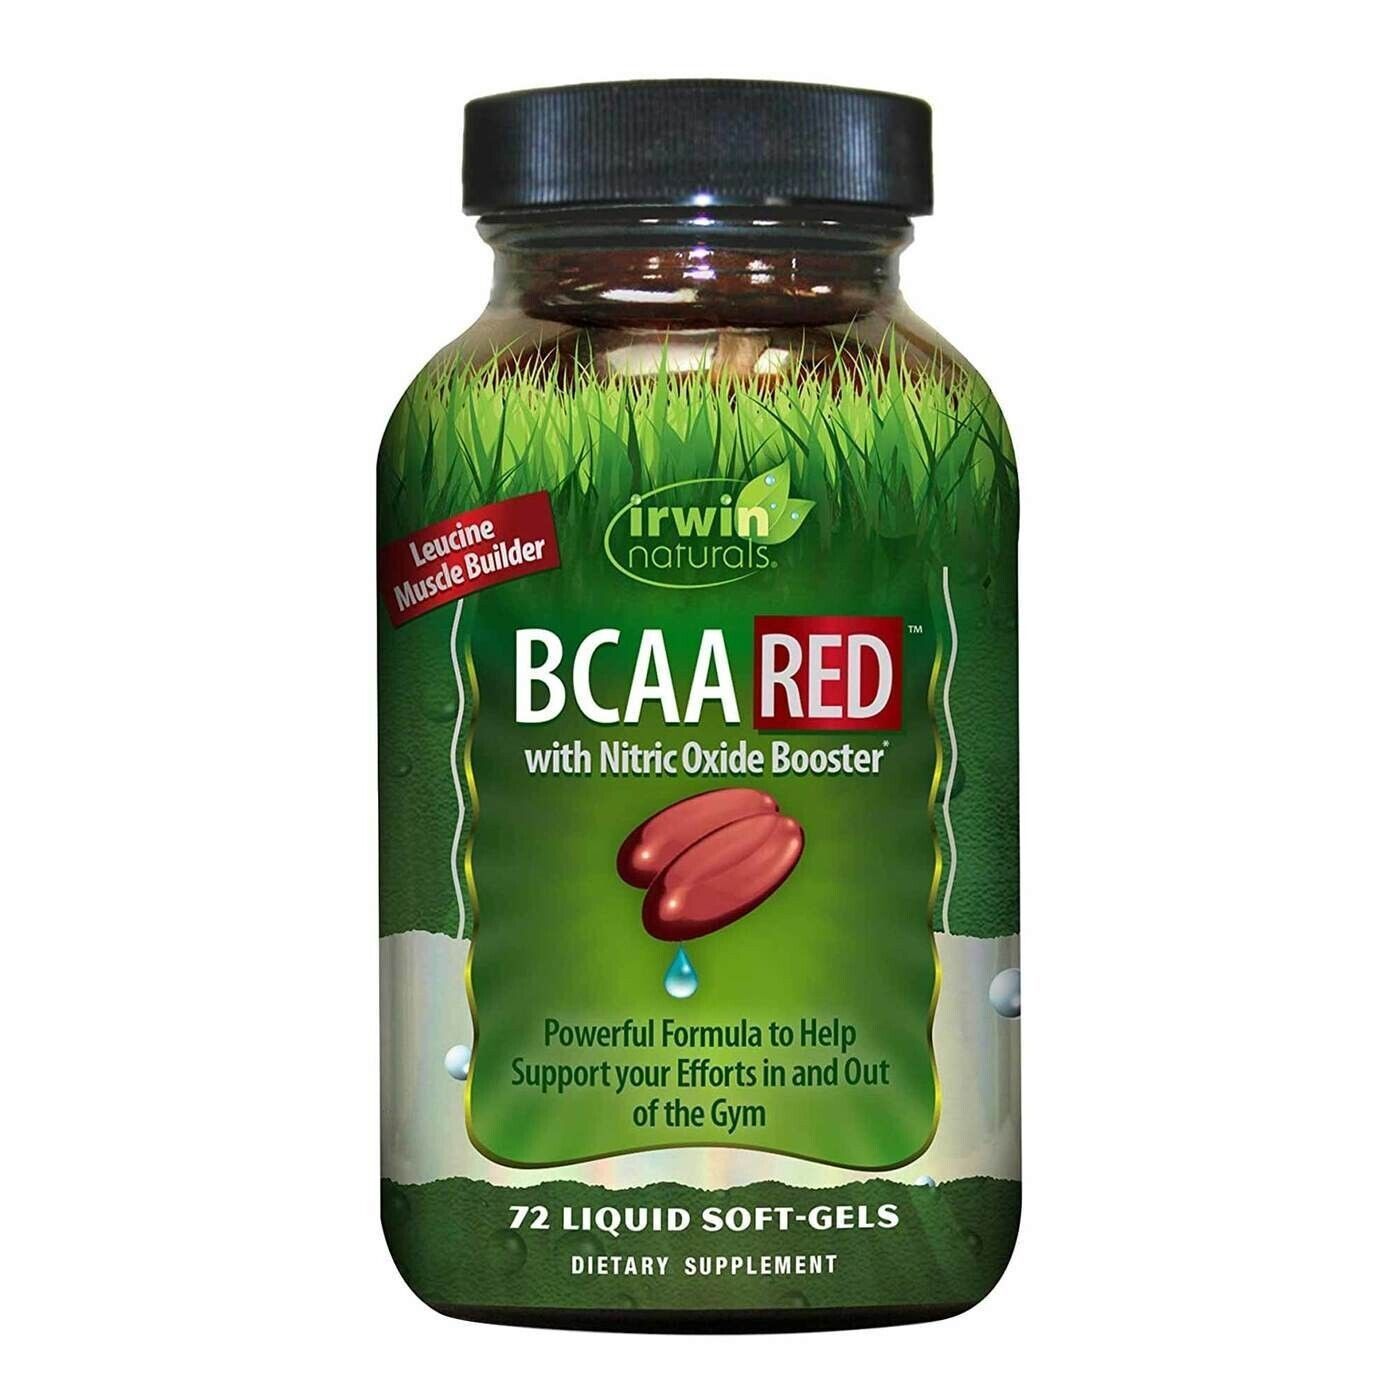 Irwin Naturals BCAA RED with Nitric Oxide Booster 72 Liquid Soft Gels - $18.69